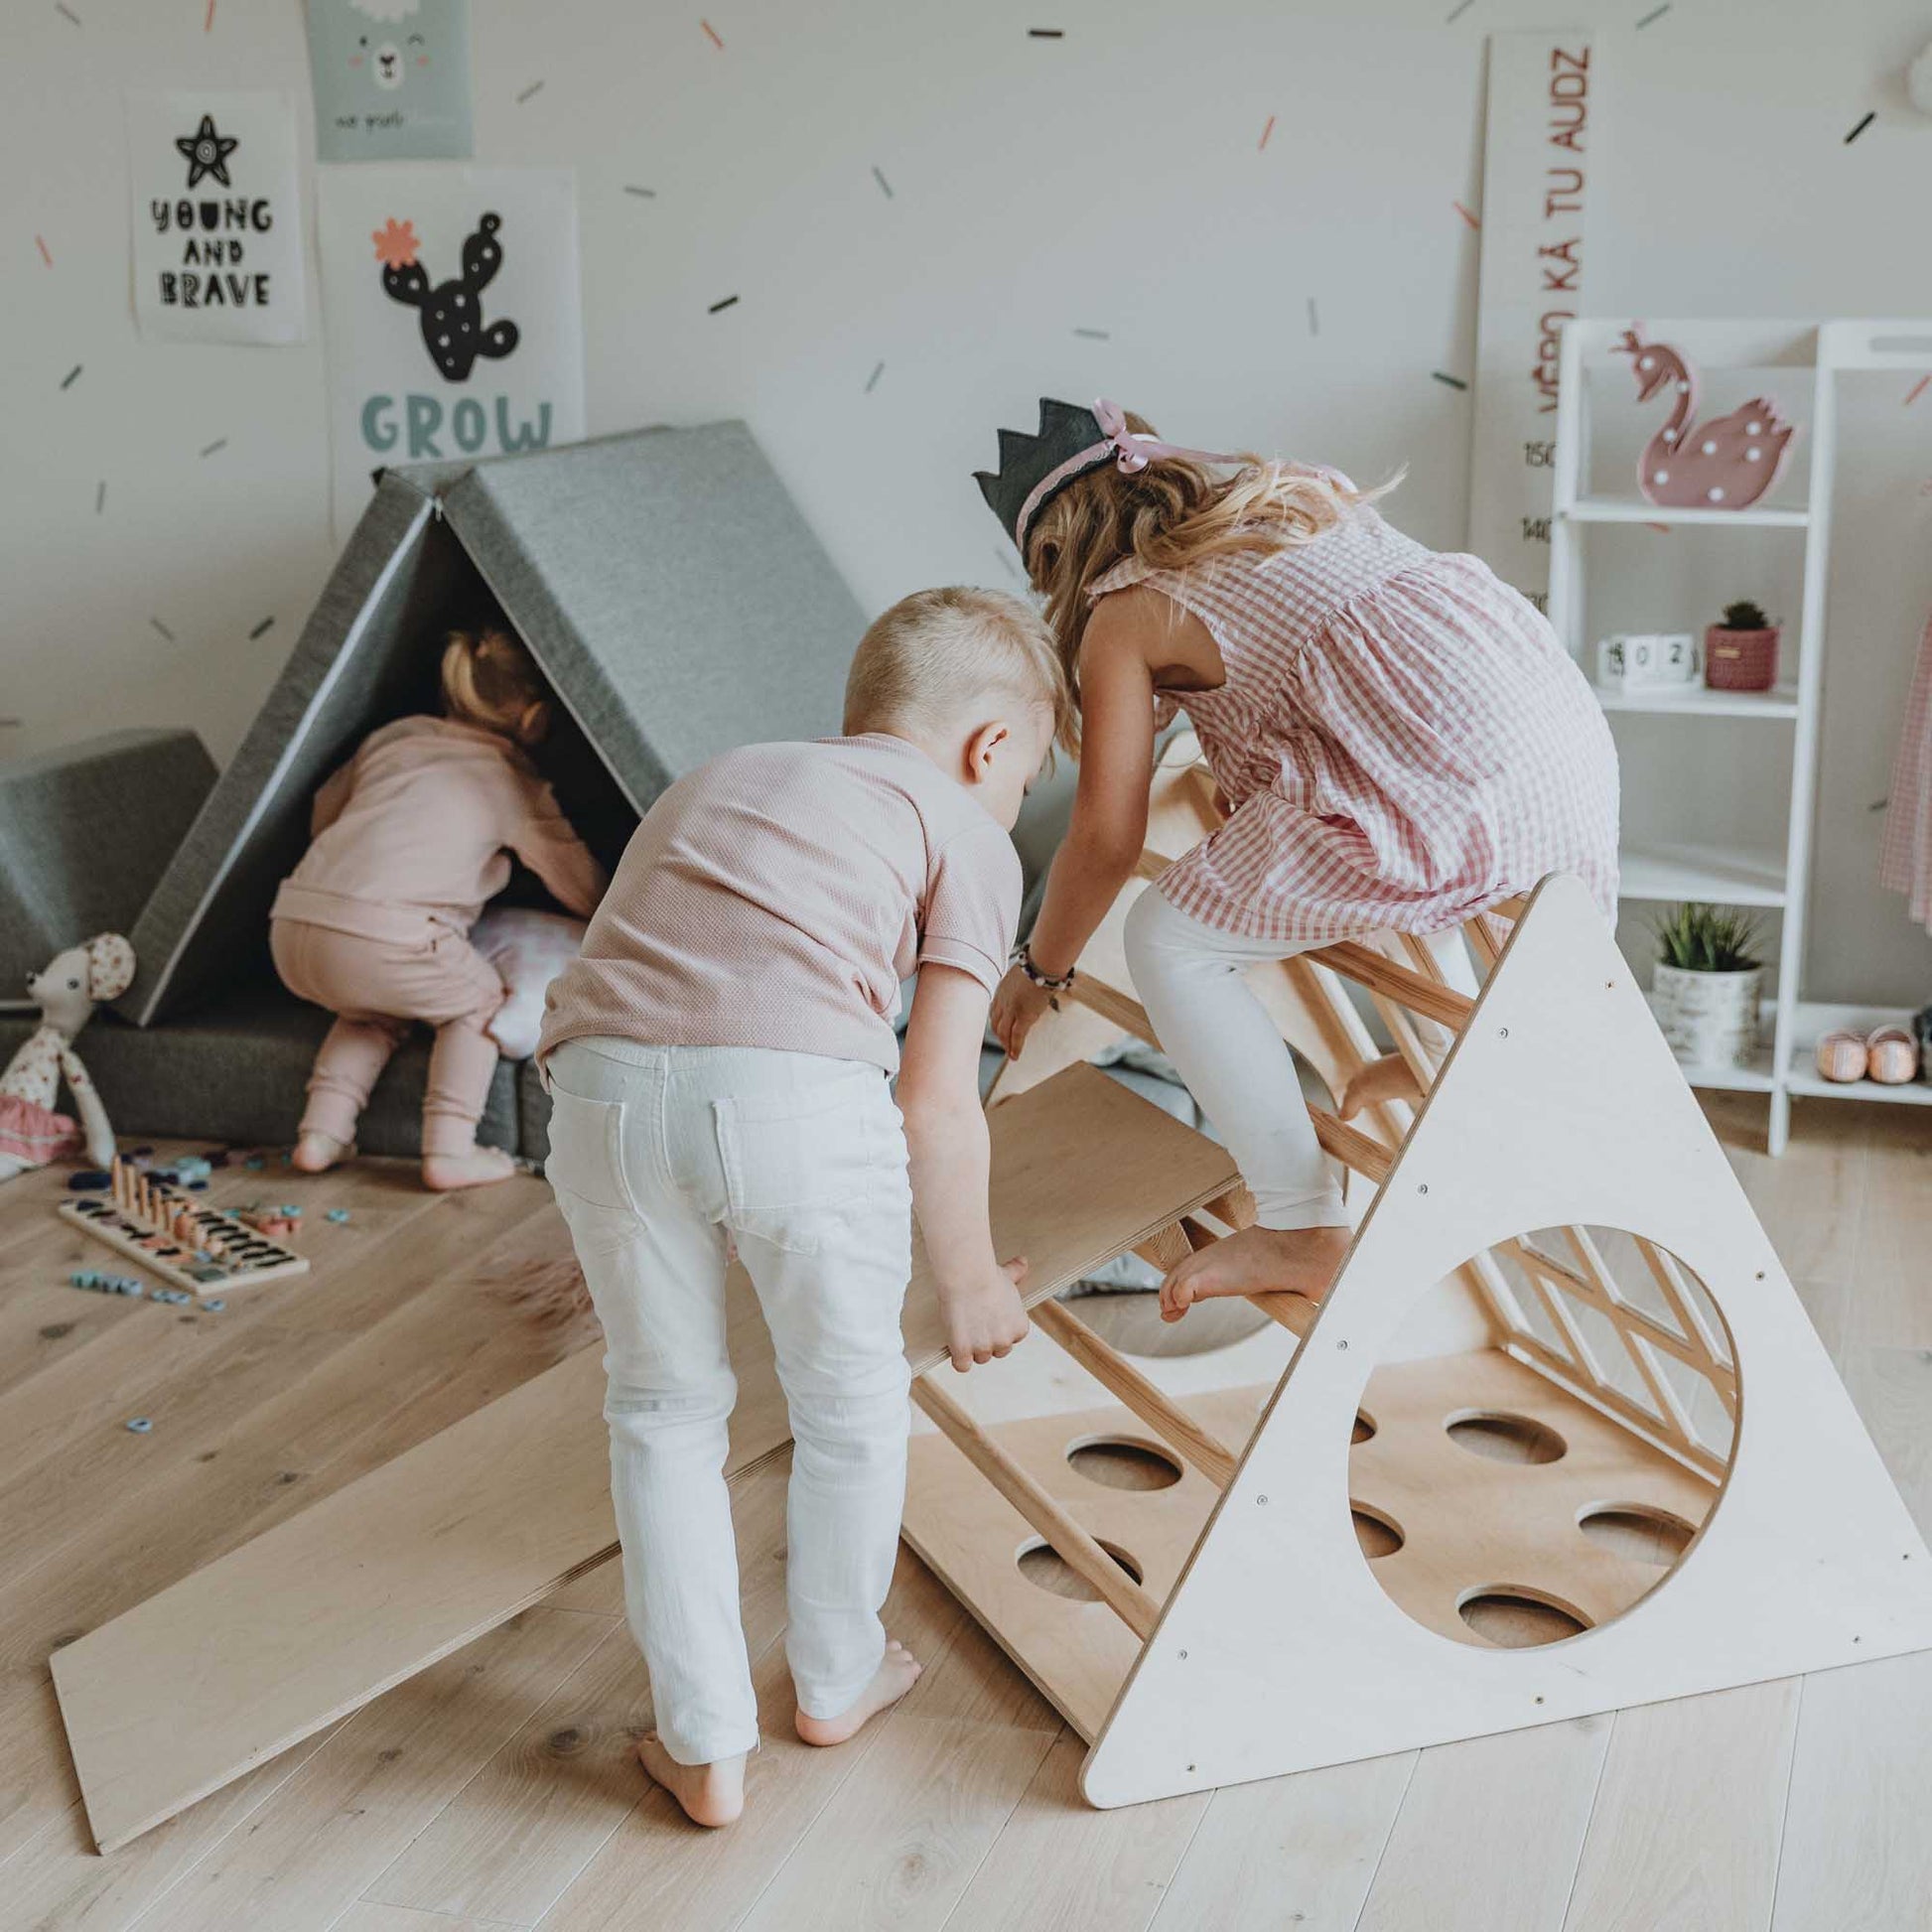 Two children engaging in Montessori play with a climbing triangle with sensory panels, honing their motor skills as they climb a small ladder in the playroom.